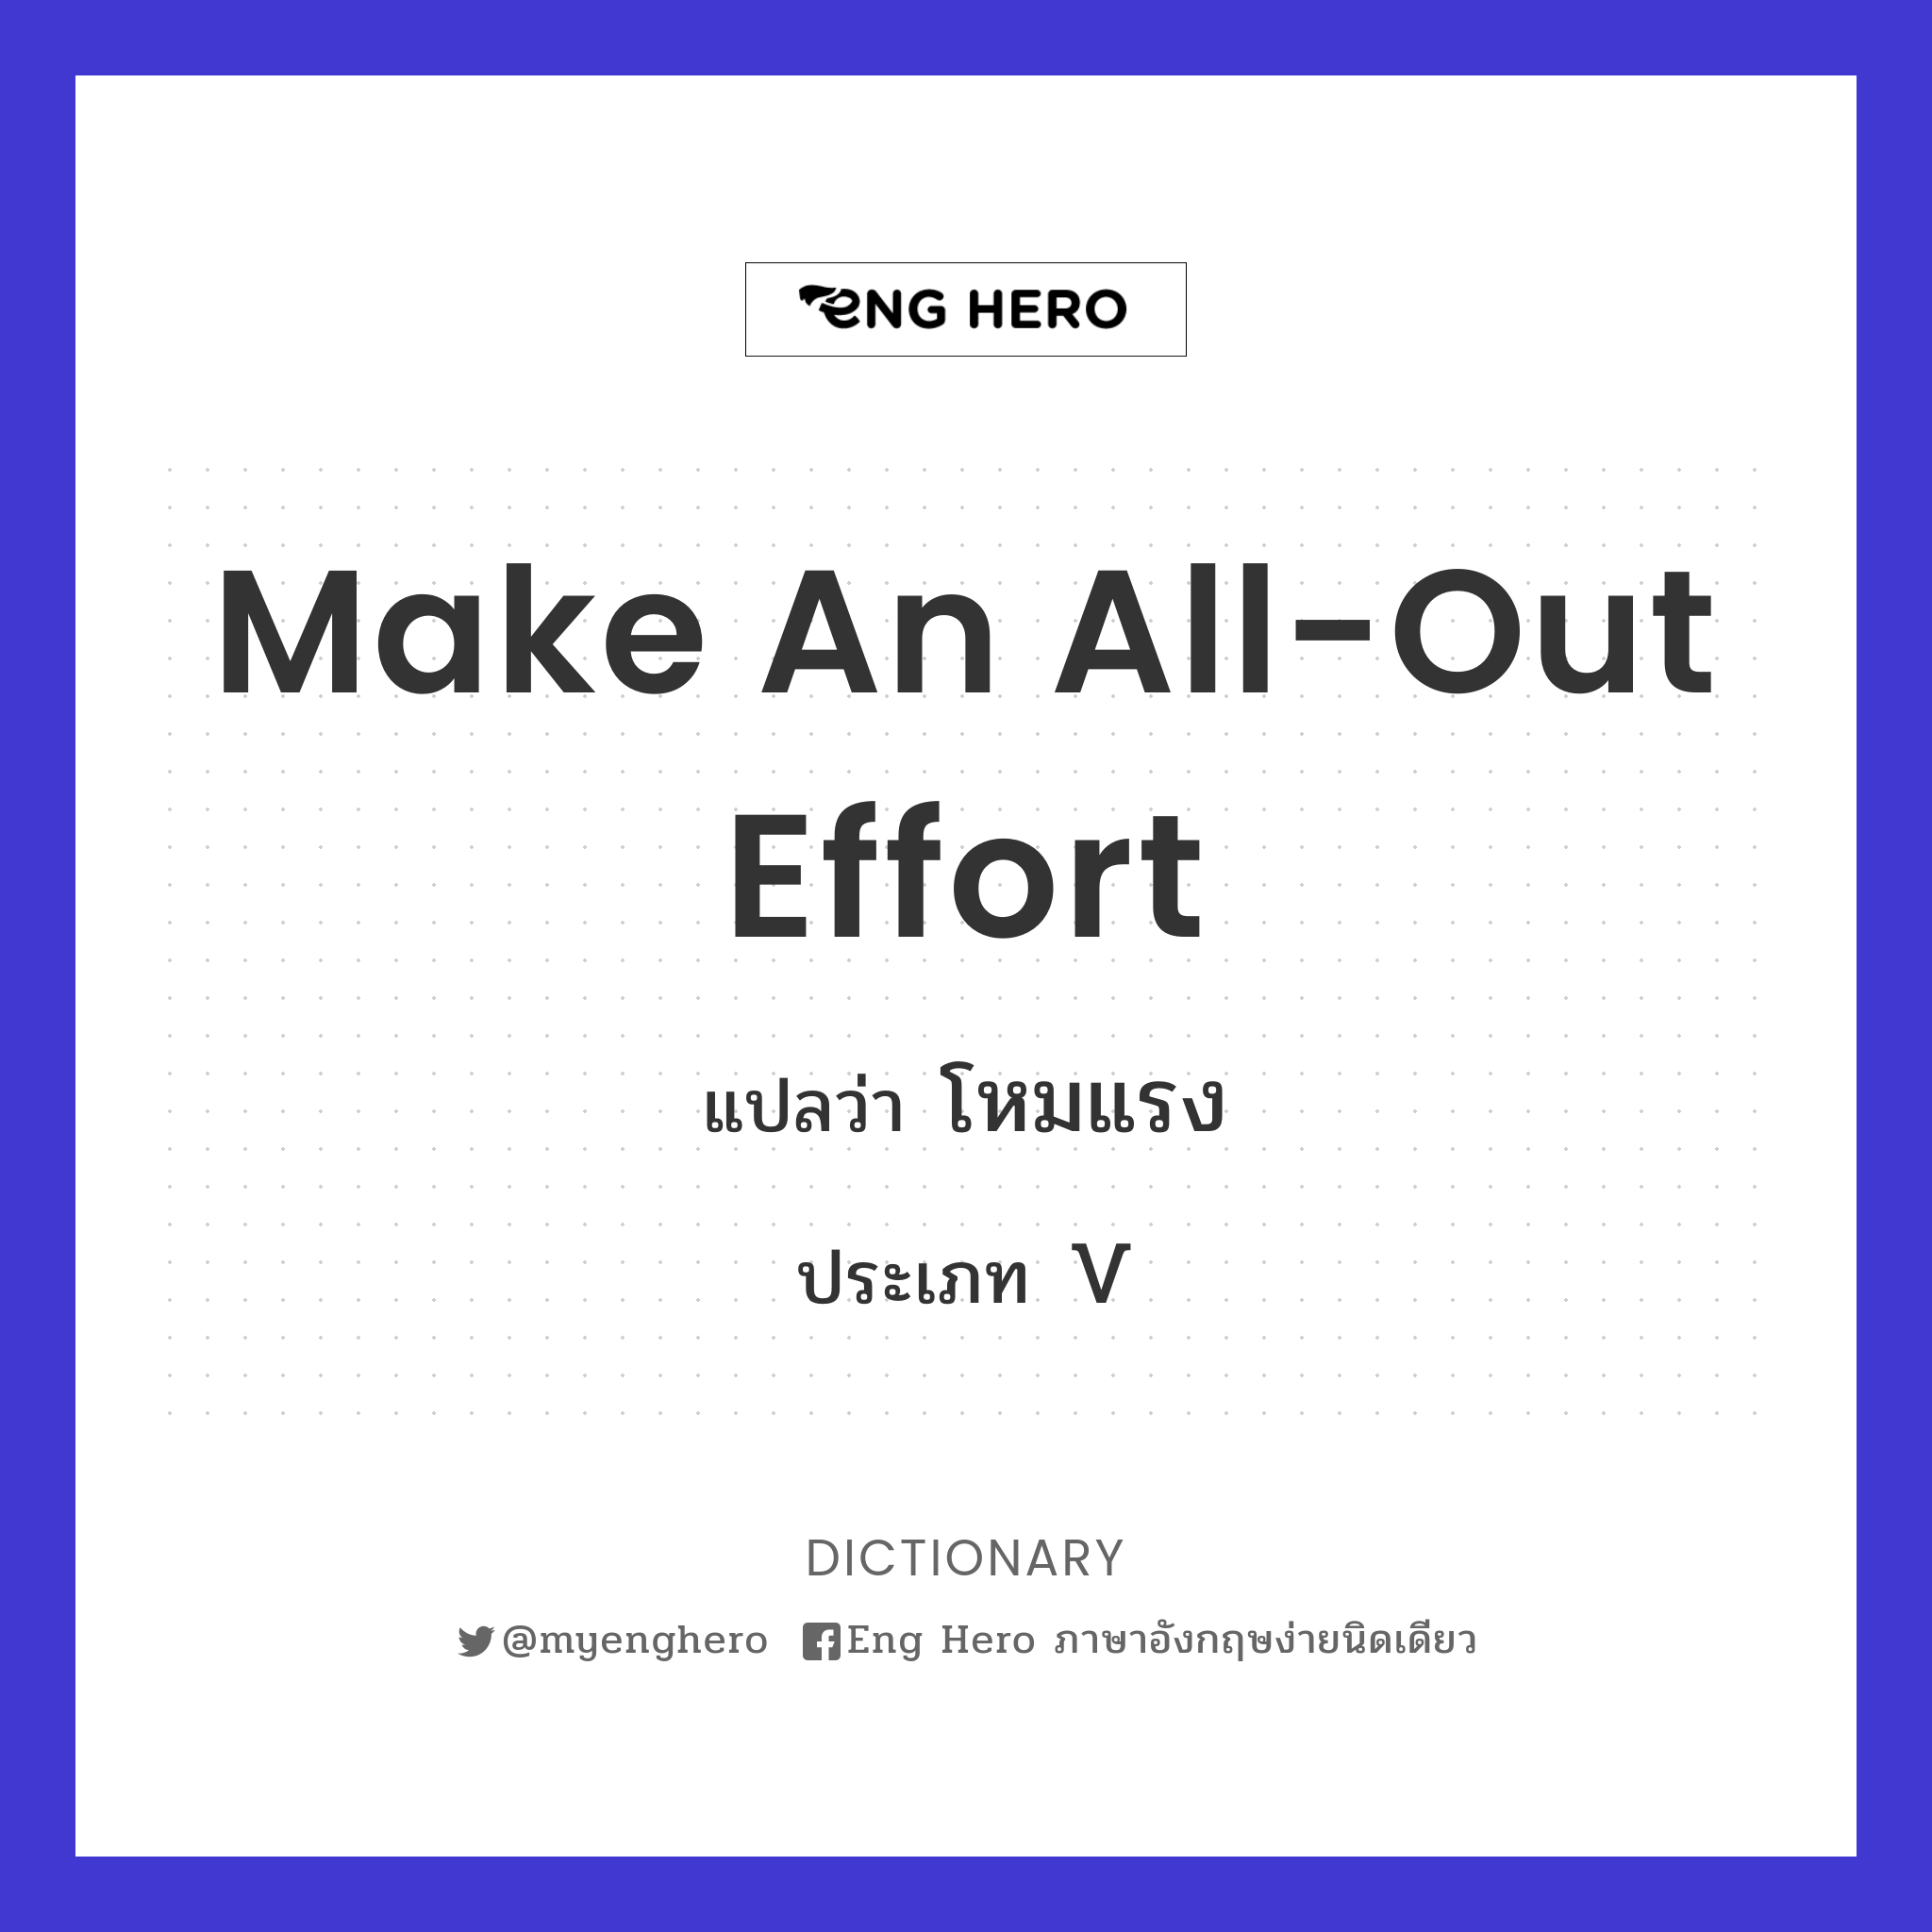 make an all-out effort